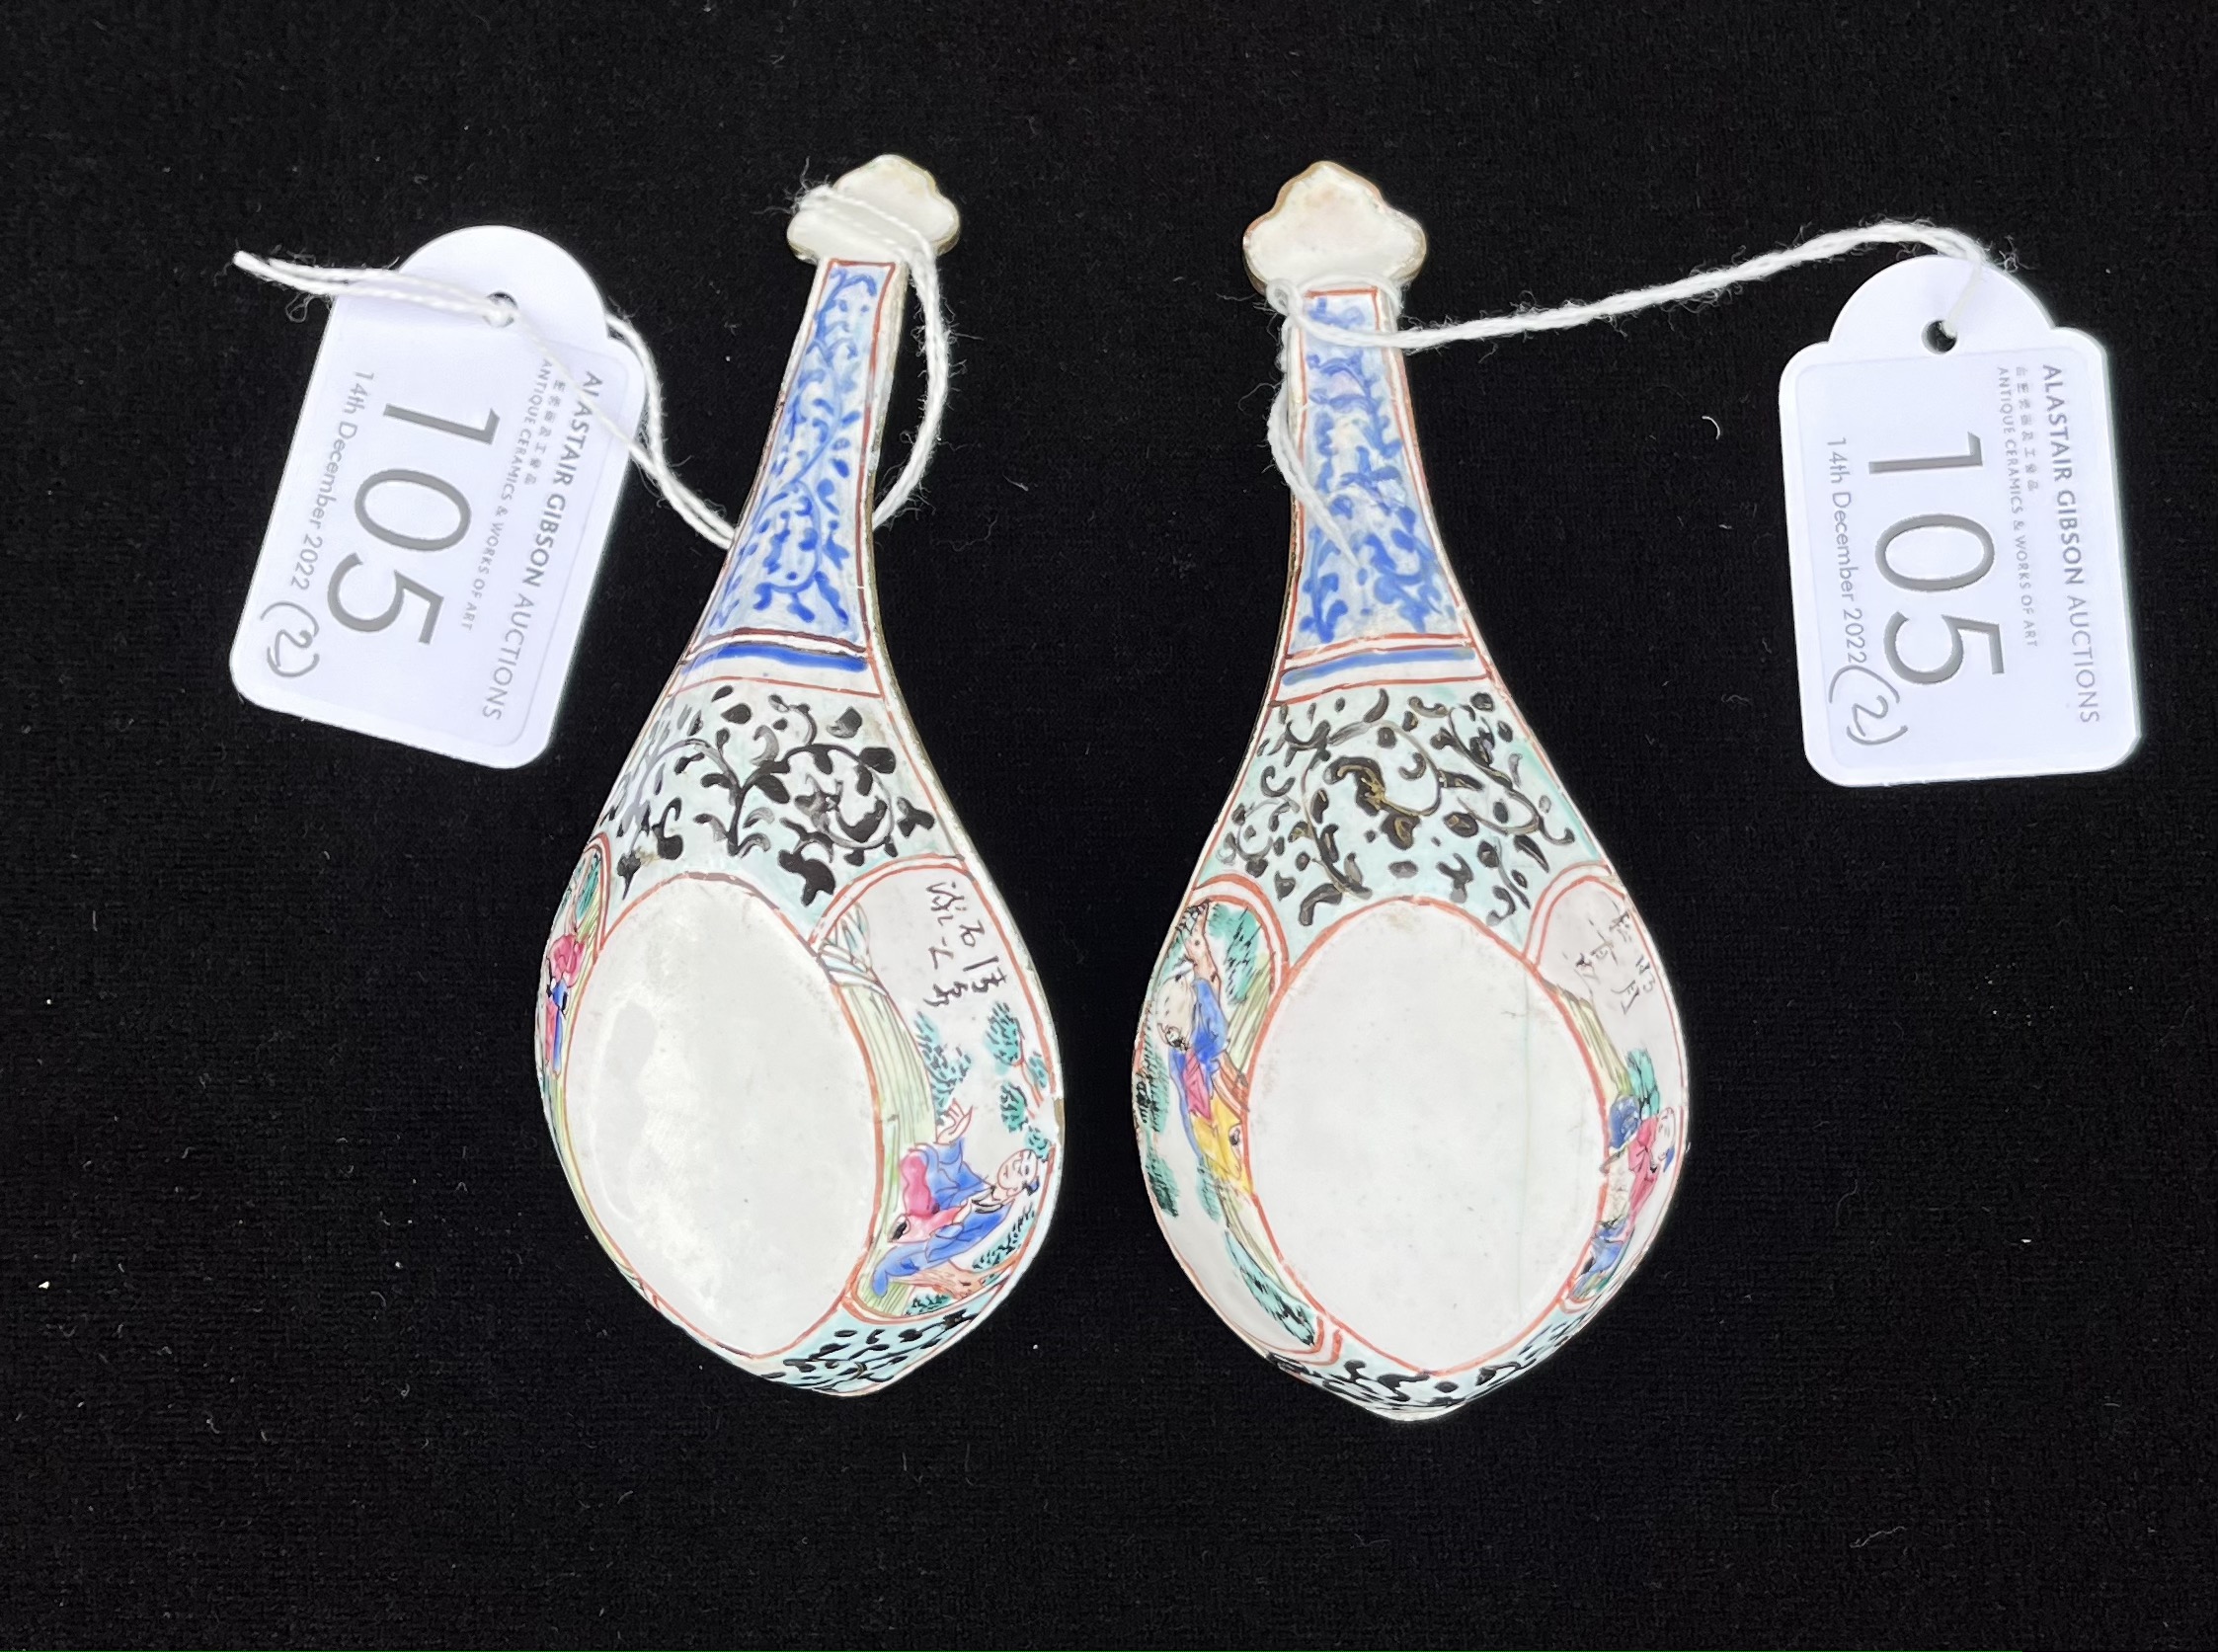 A PAIR OF CANTON ENAMEL SPOONS, QING DYNASTY, QIANLONG PERIOD, 1736 – 1795 - Image 4 of 6